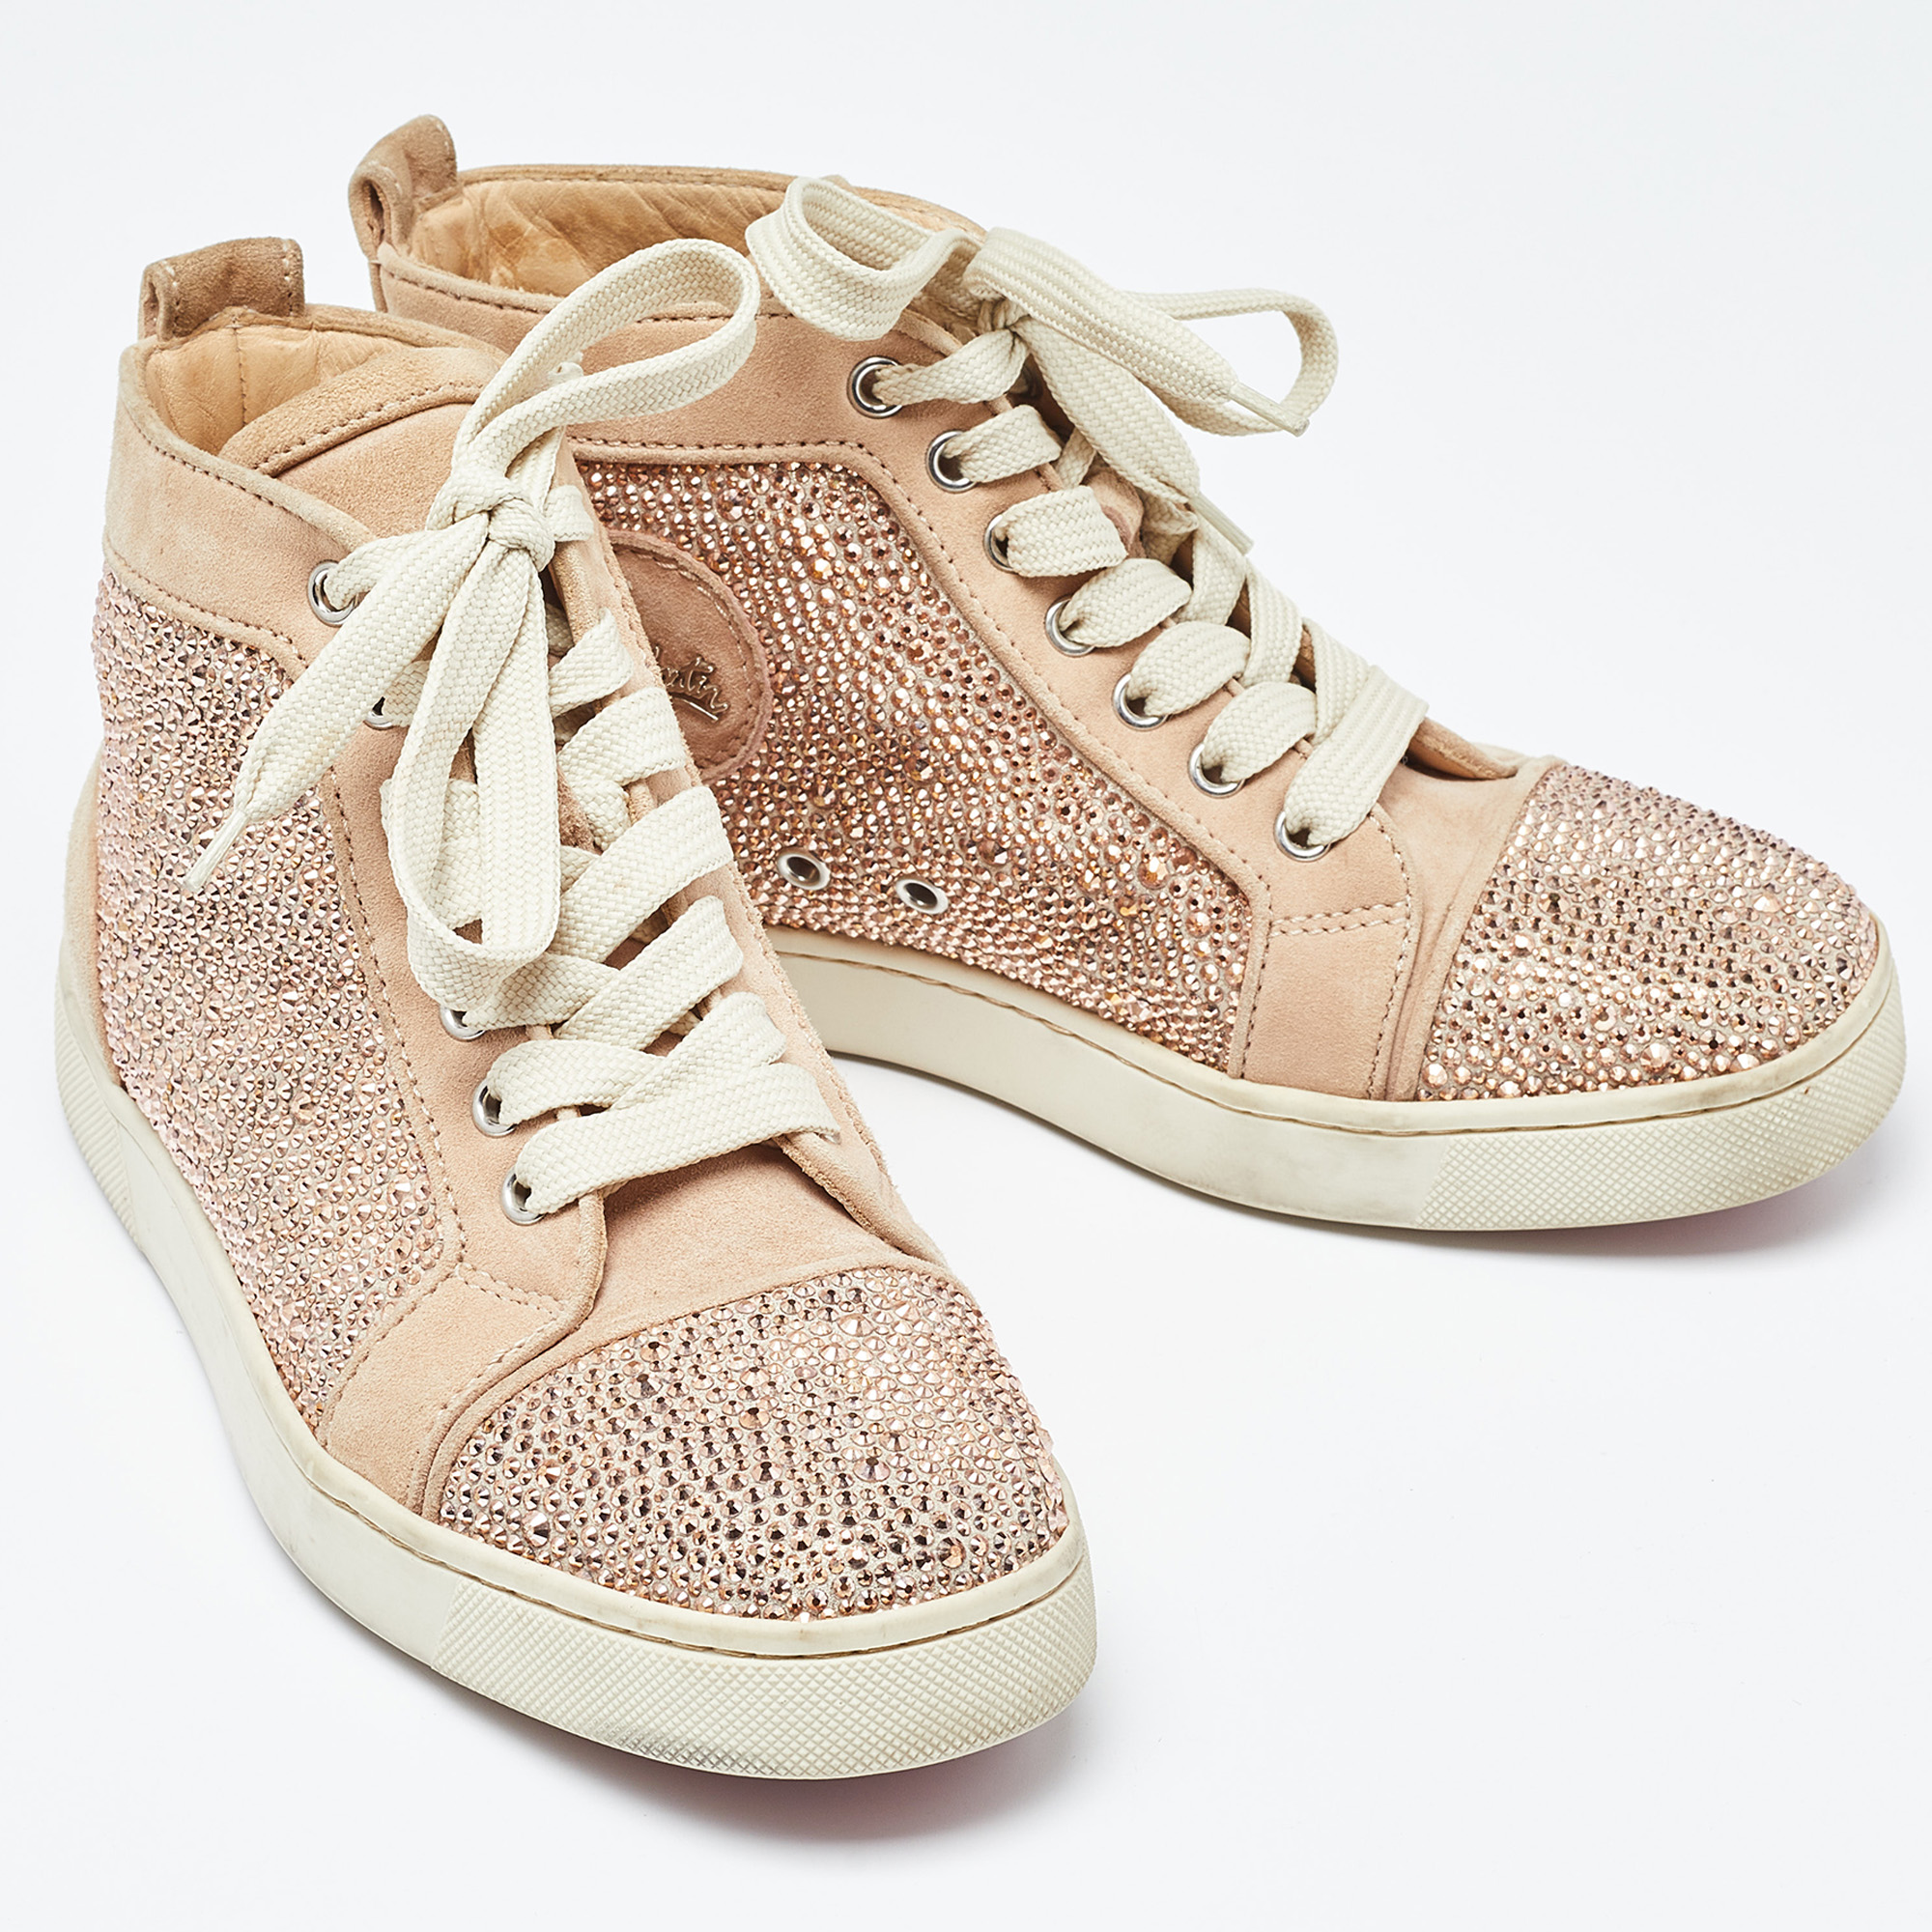 Christian Louboutin Beige Suede Embellished High Top Sneakers Size 37.5